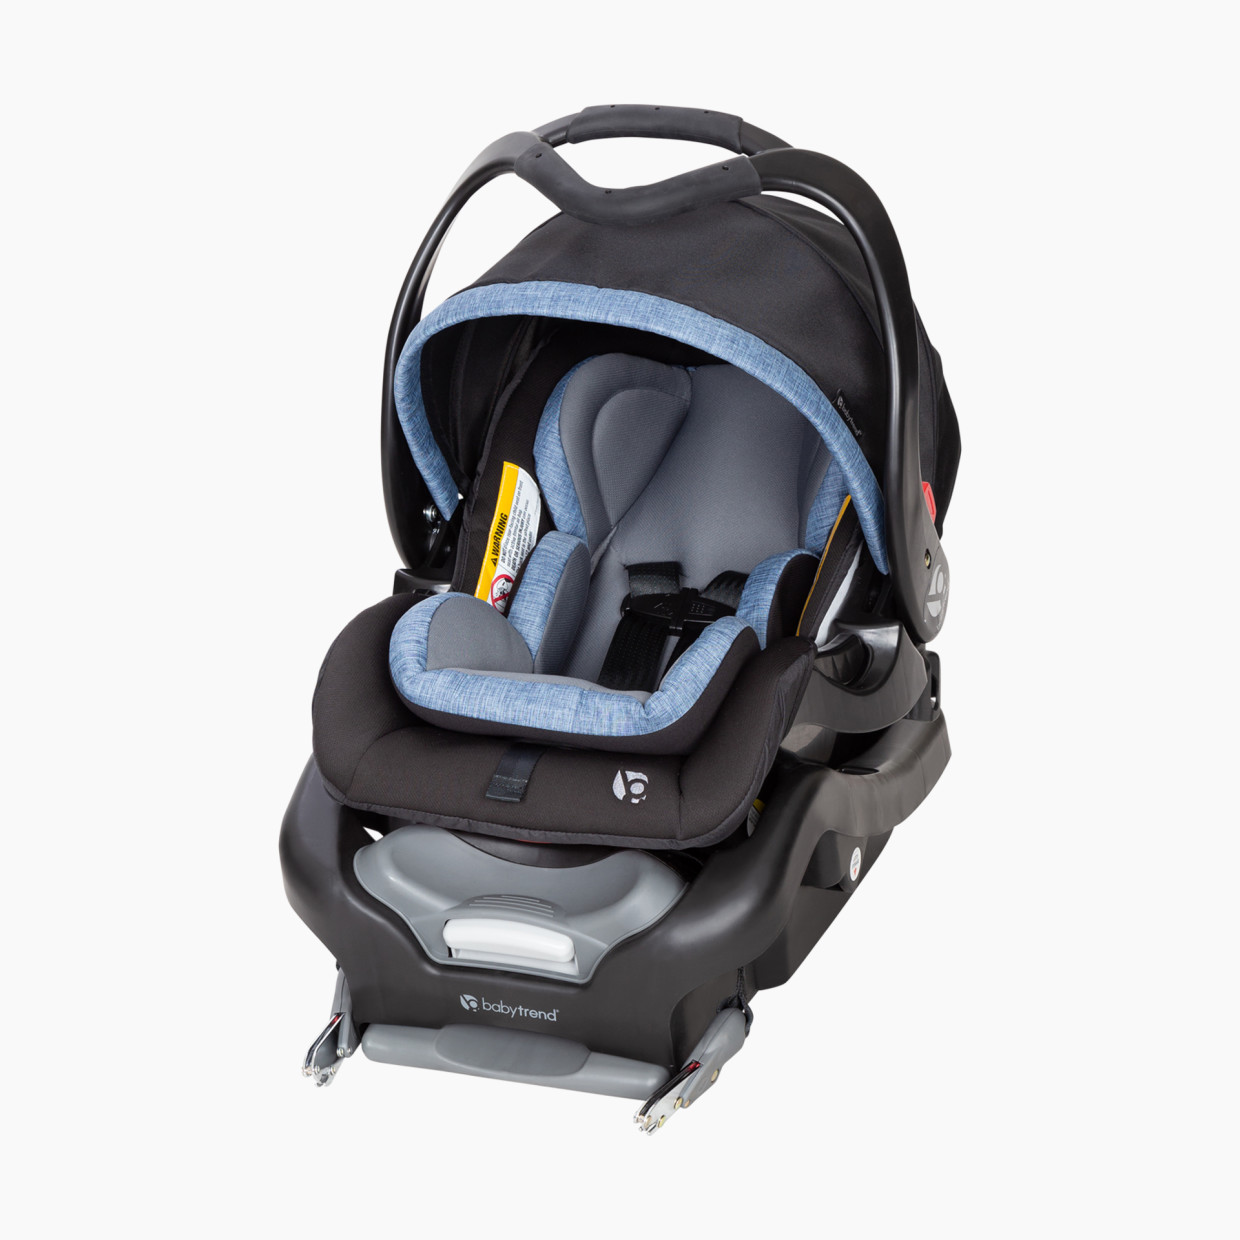 Baby Trend Secure Snap Tech 35 Infant Car Seat - Chambray.